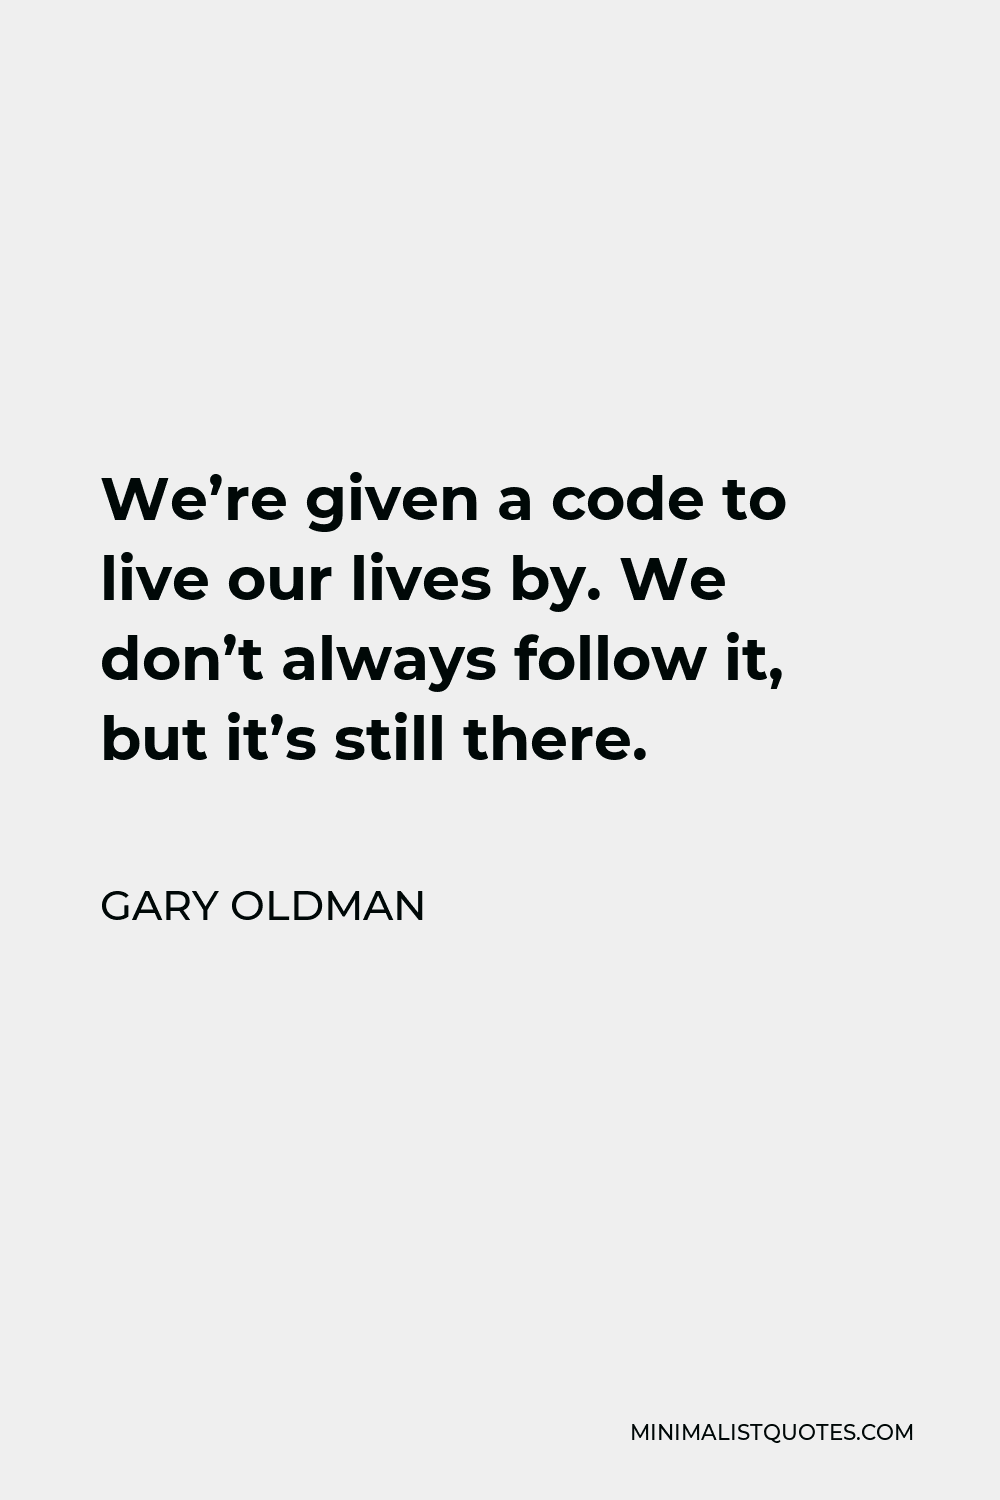 Gary Oldman Quote - We’re given a code to live our lives by. We don’t always follow it, but it’s still there.